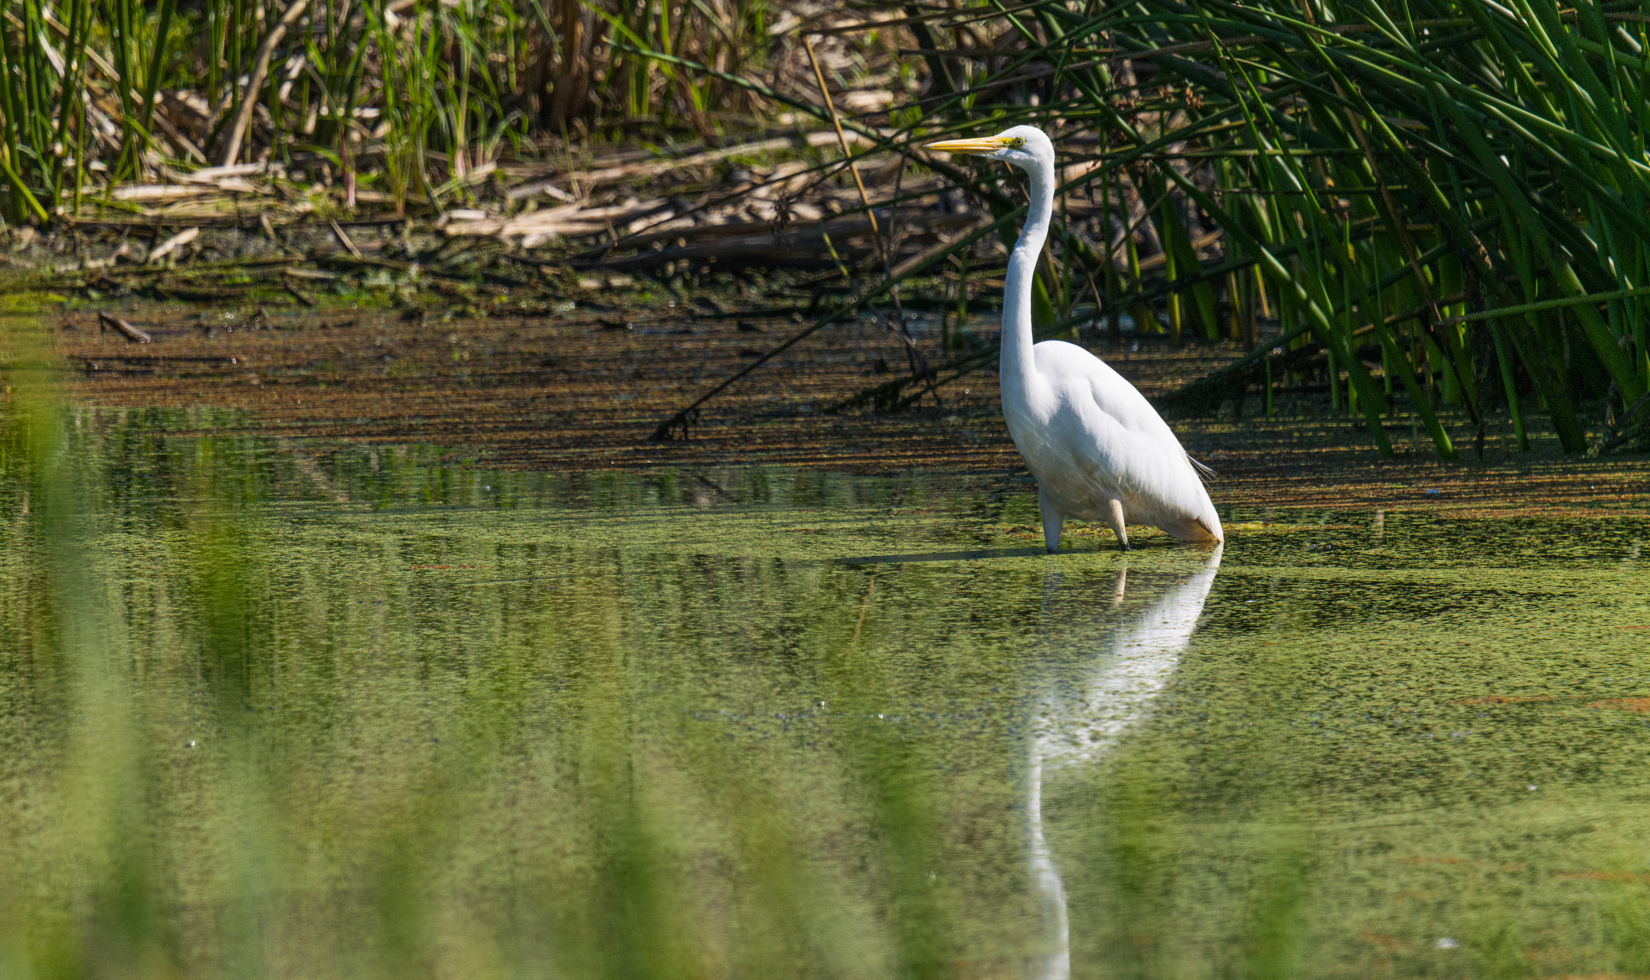 A Great Egret wades into a lake.